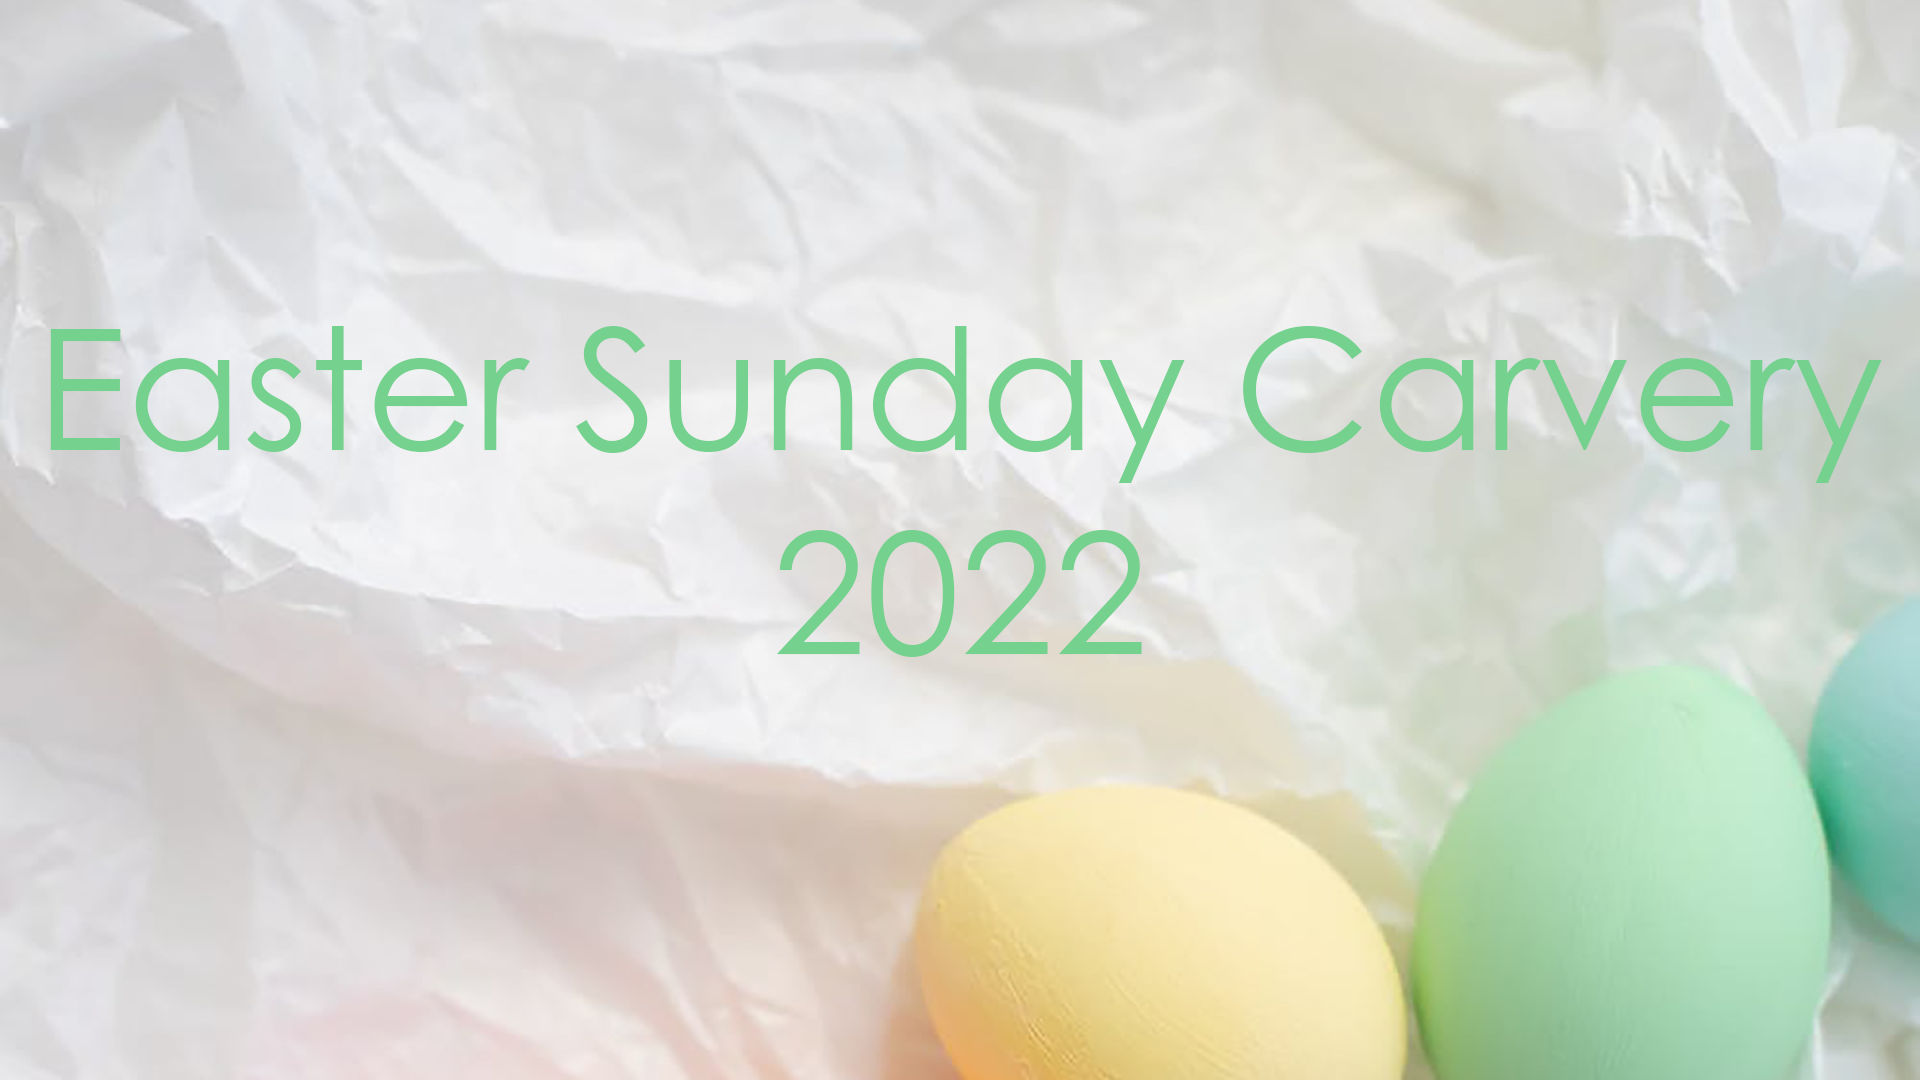 Easter Sunday Carvery 2022